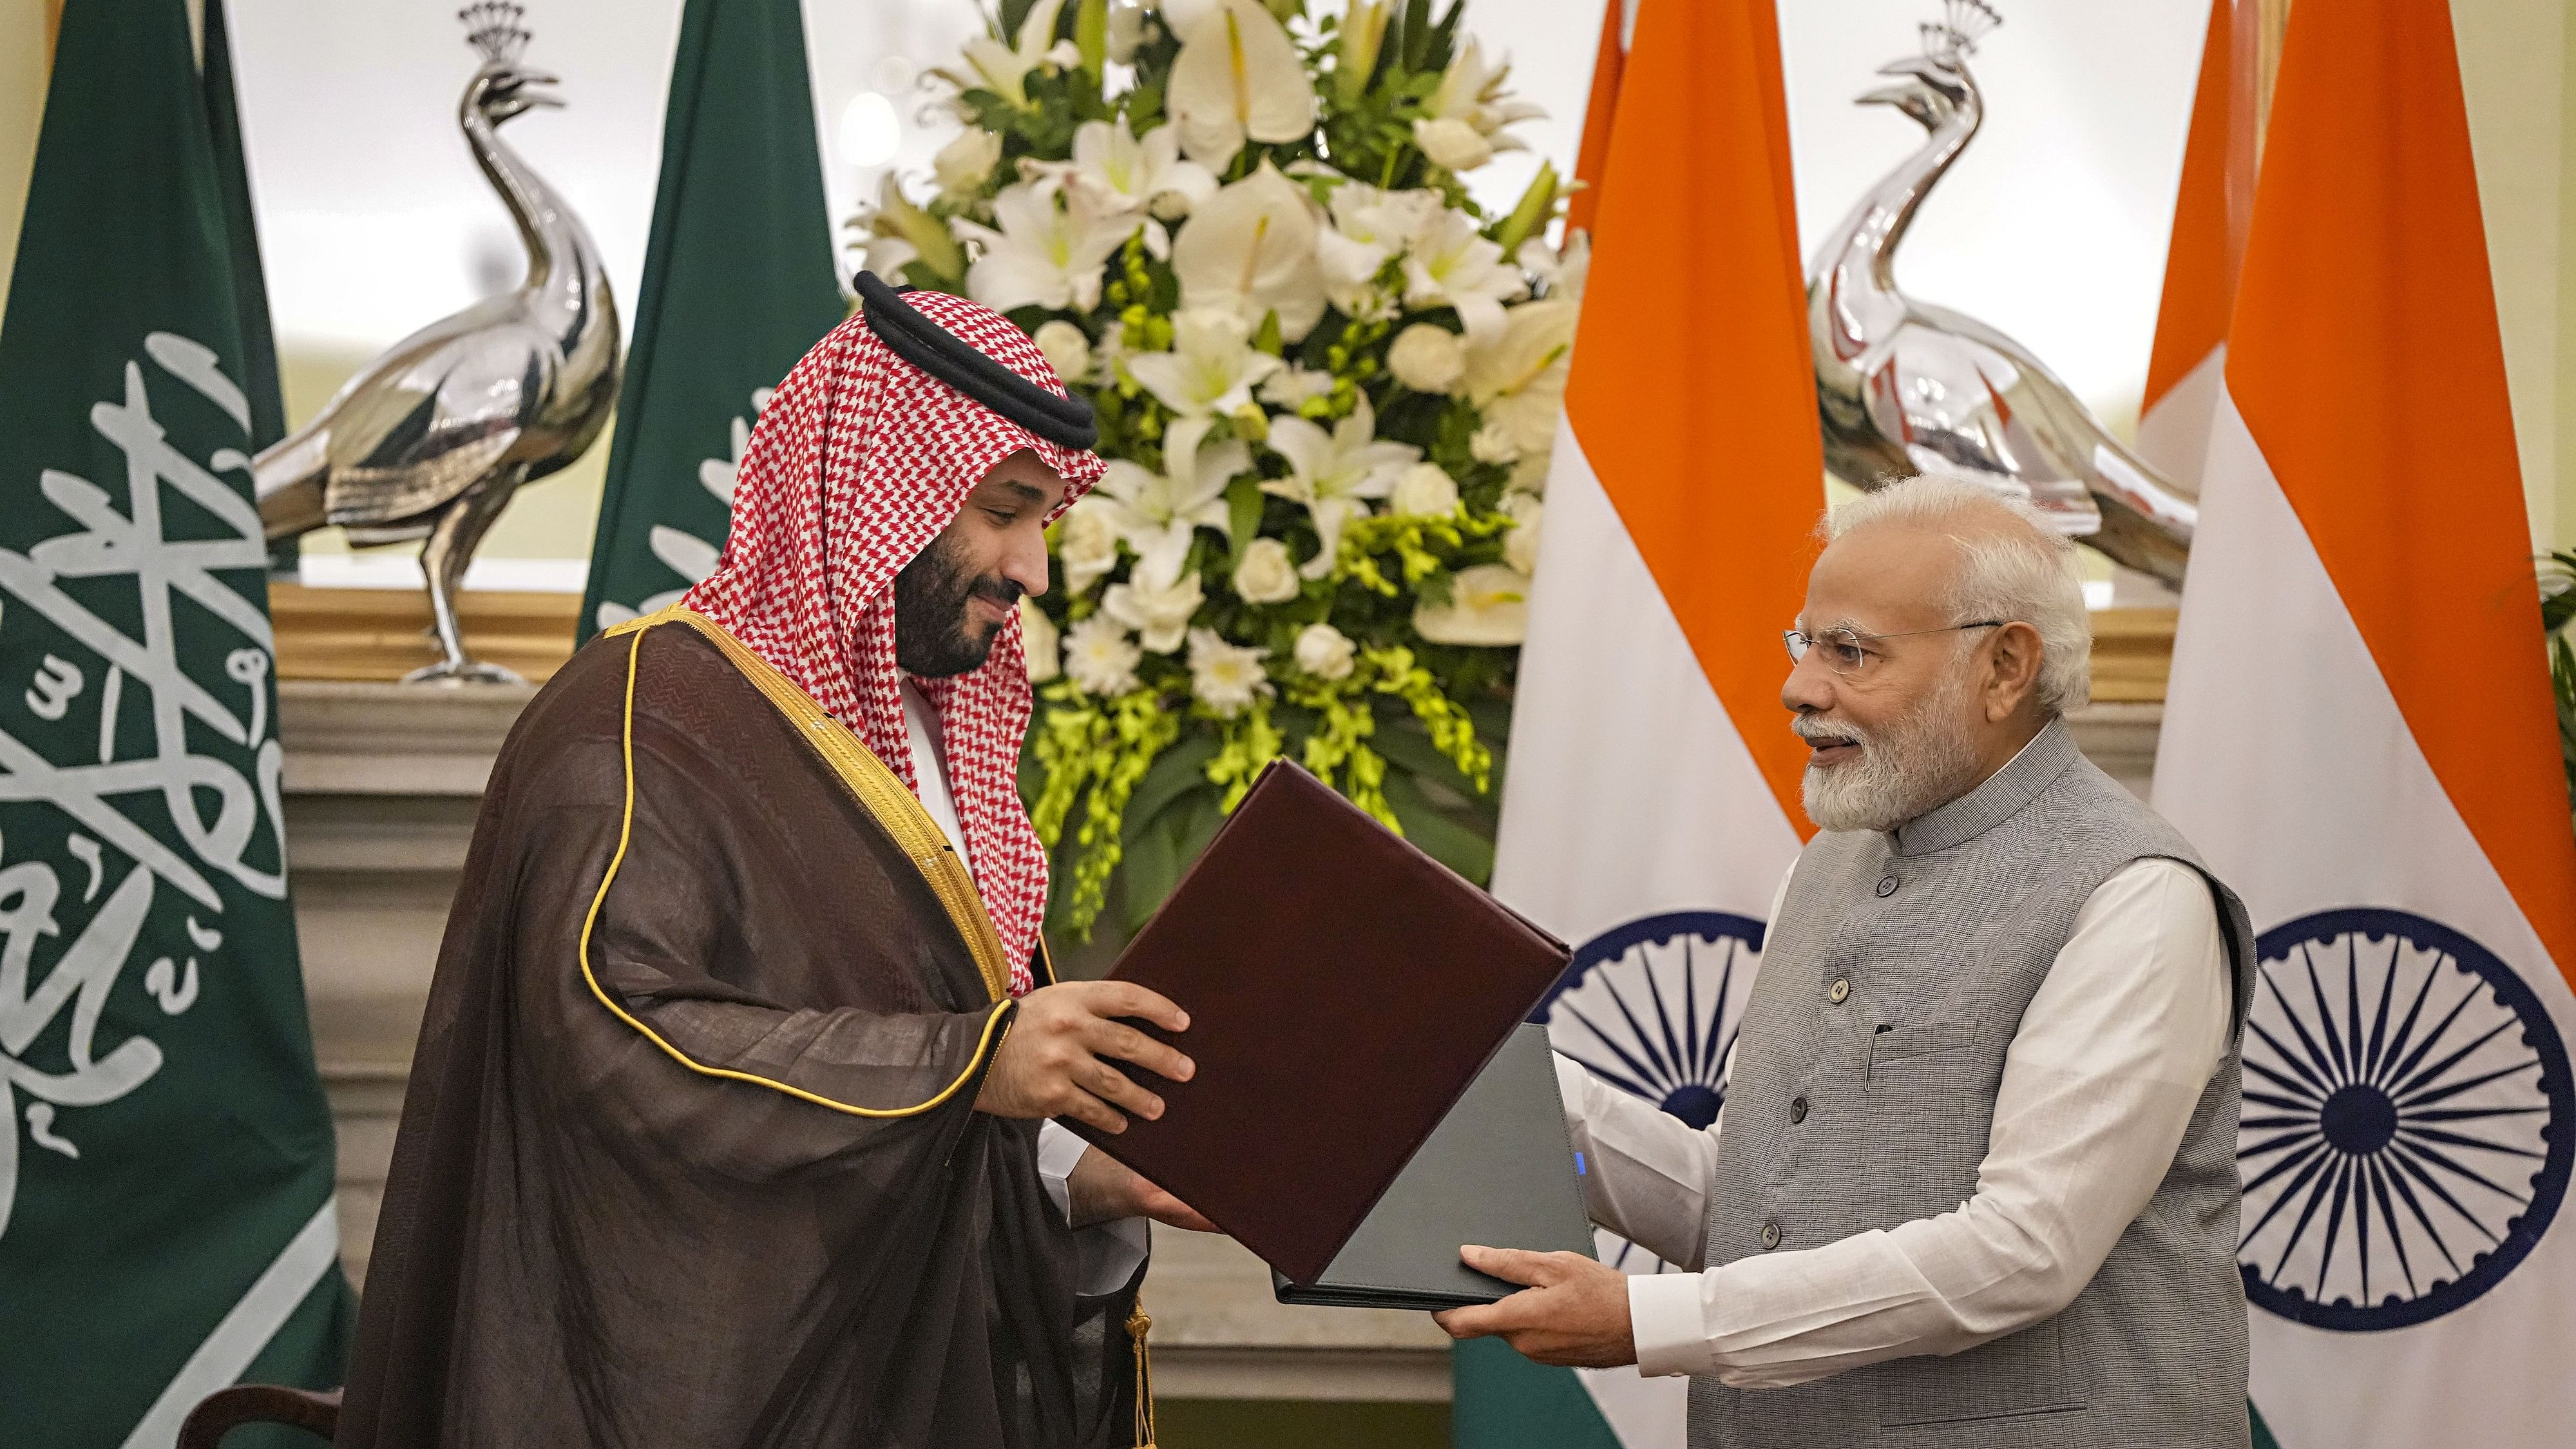 <div class="paragraphs"><p>Prime Minister Narendra Modi and Saudi Arabia's Crown Prince and Prime Minister Mohammed bin Salman bin Abdulaziz Al Saud during signing of minutes of the first meeting of India-Saudi Arabia Strategic Partnership Council at the Hyderabad House, in New Delhi.</p></div>